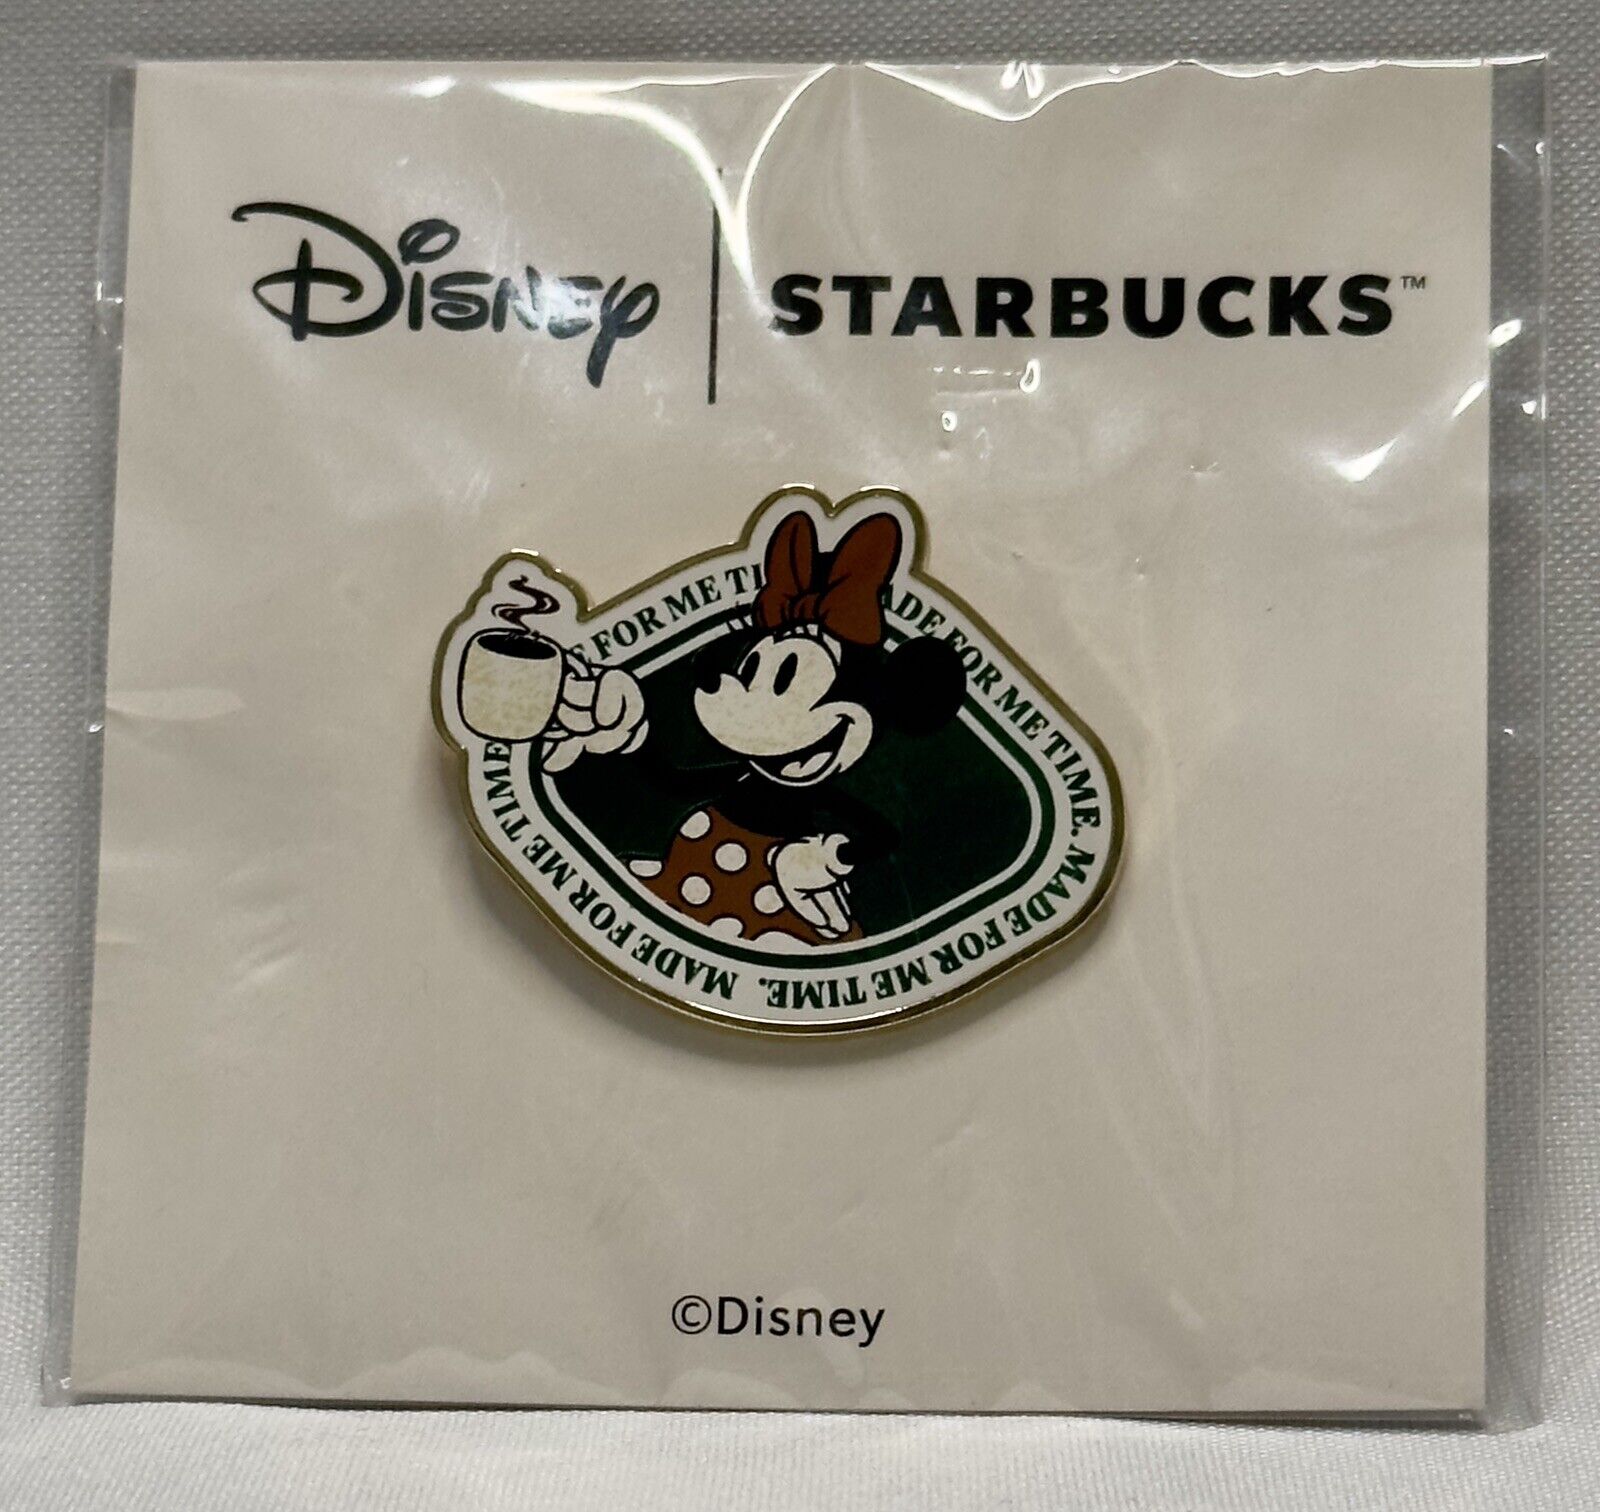 Disney + Starbucks Collectors Minnie Mouse Pin “Made For Me Time”